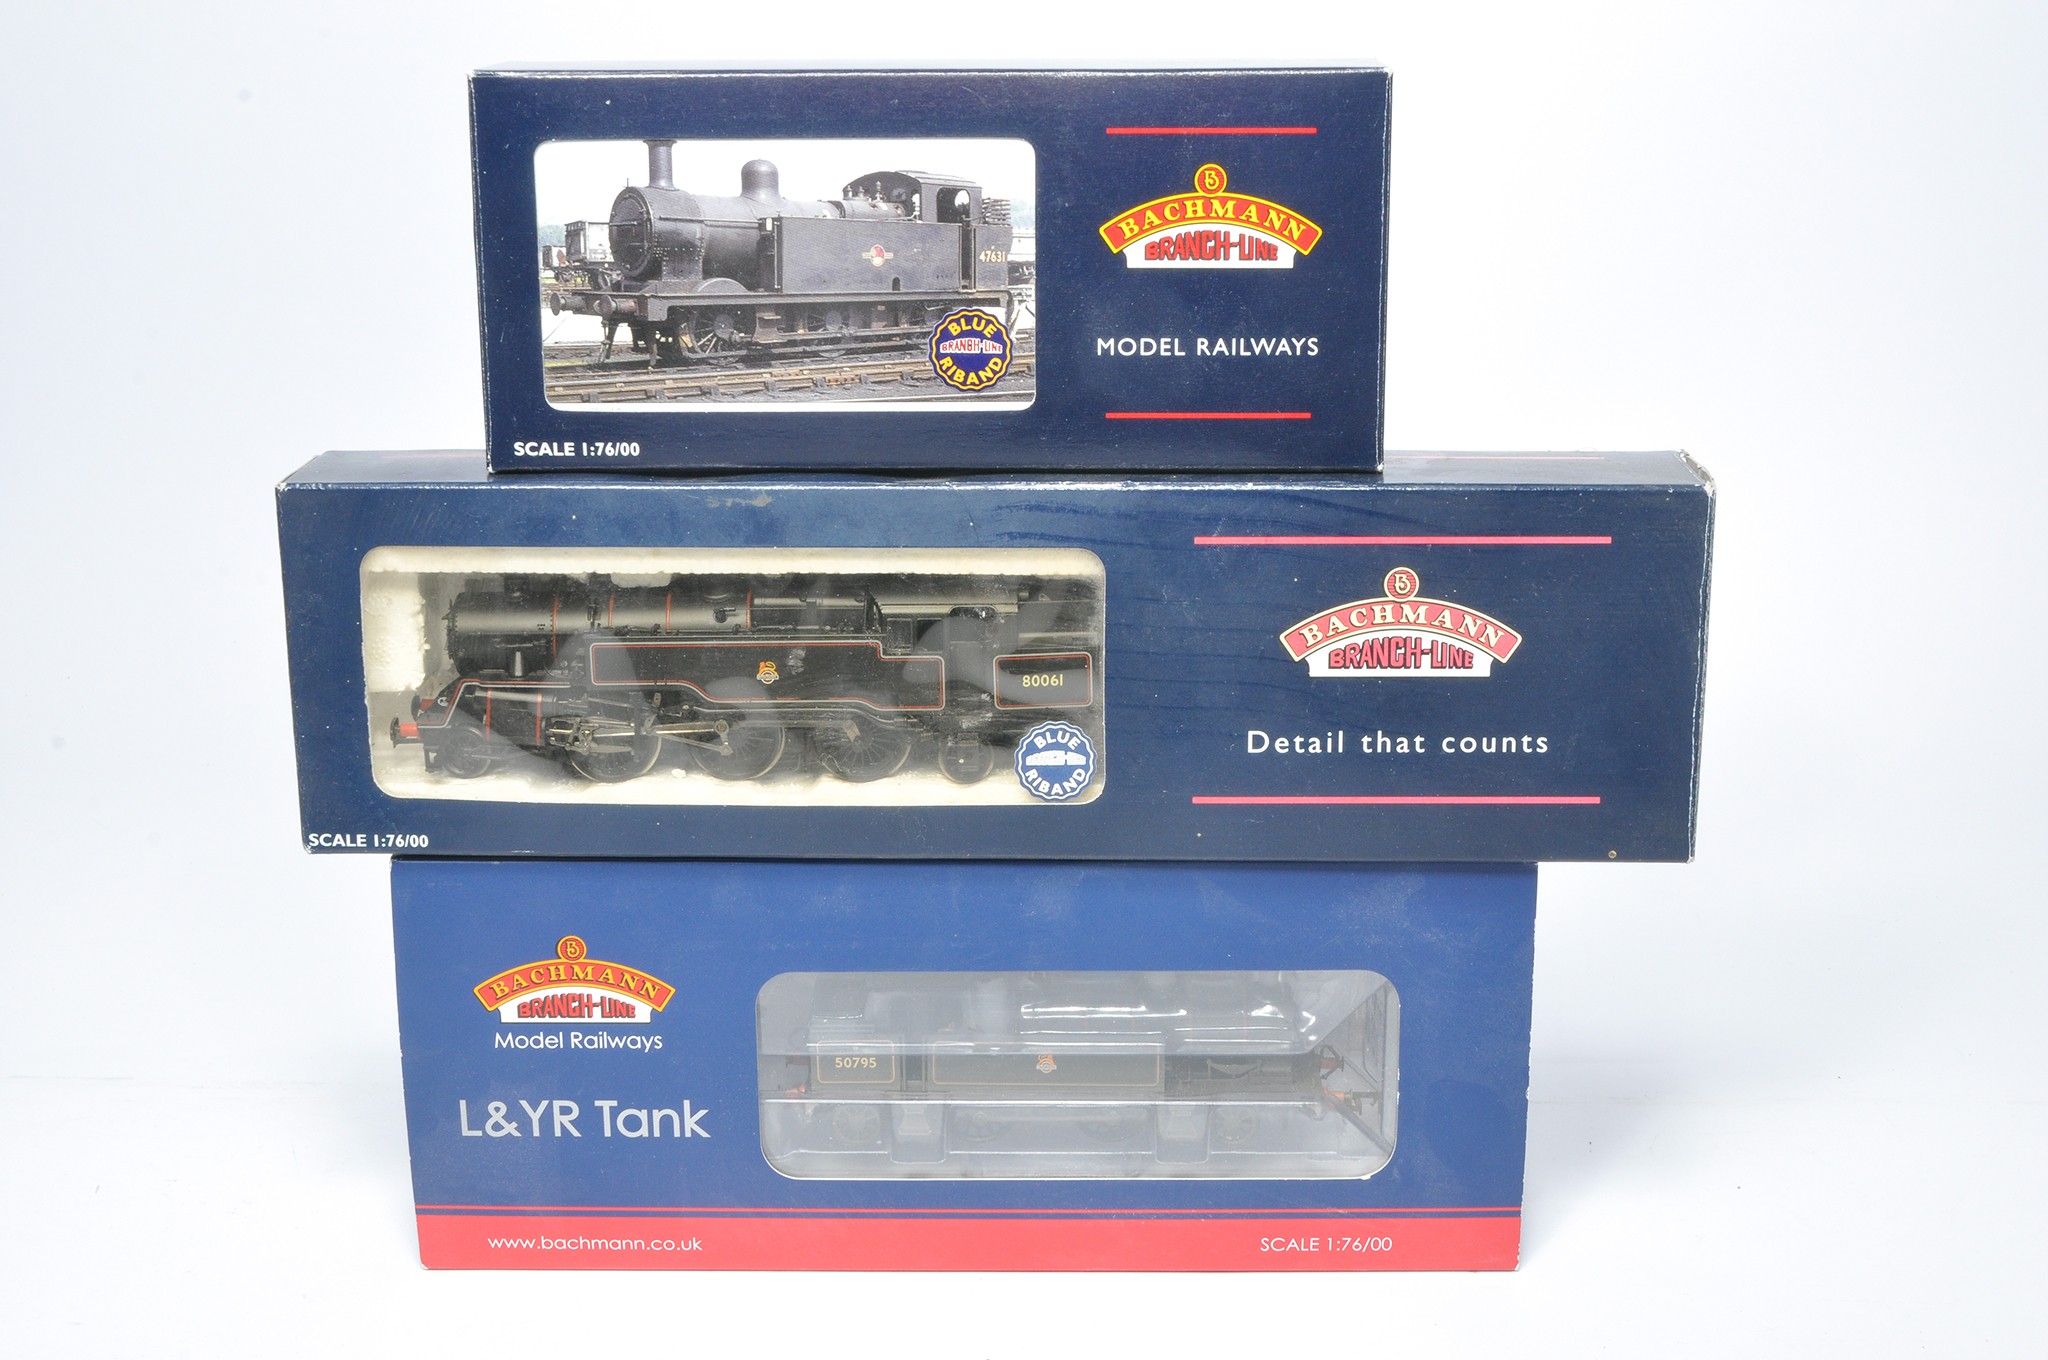 Bachmann model railway trio of locomotives as shown. Untested but look to display good with no